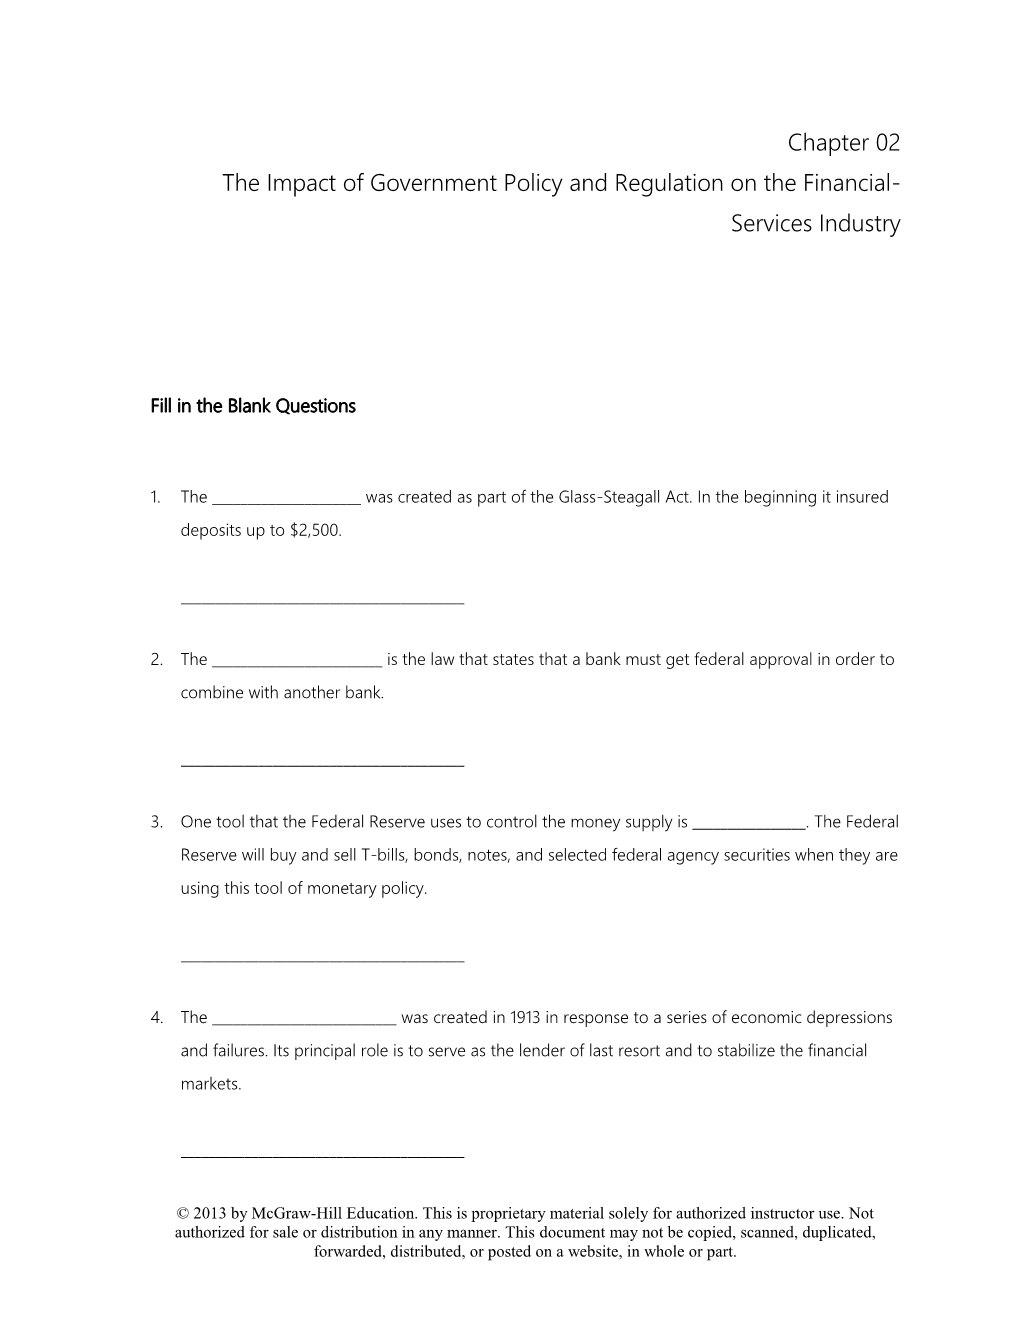 Chapter 02 the Impact of Government Policy and Regulation on the Financial- Services Industry